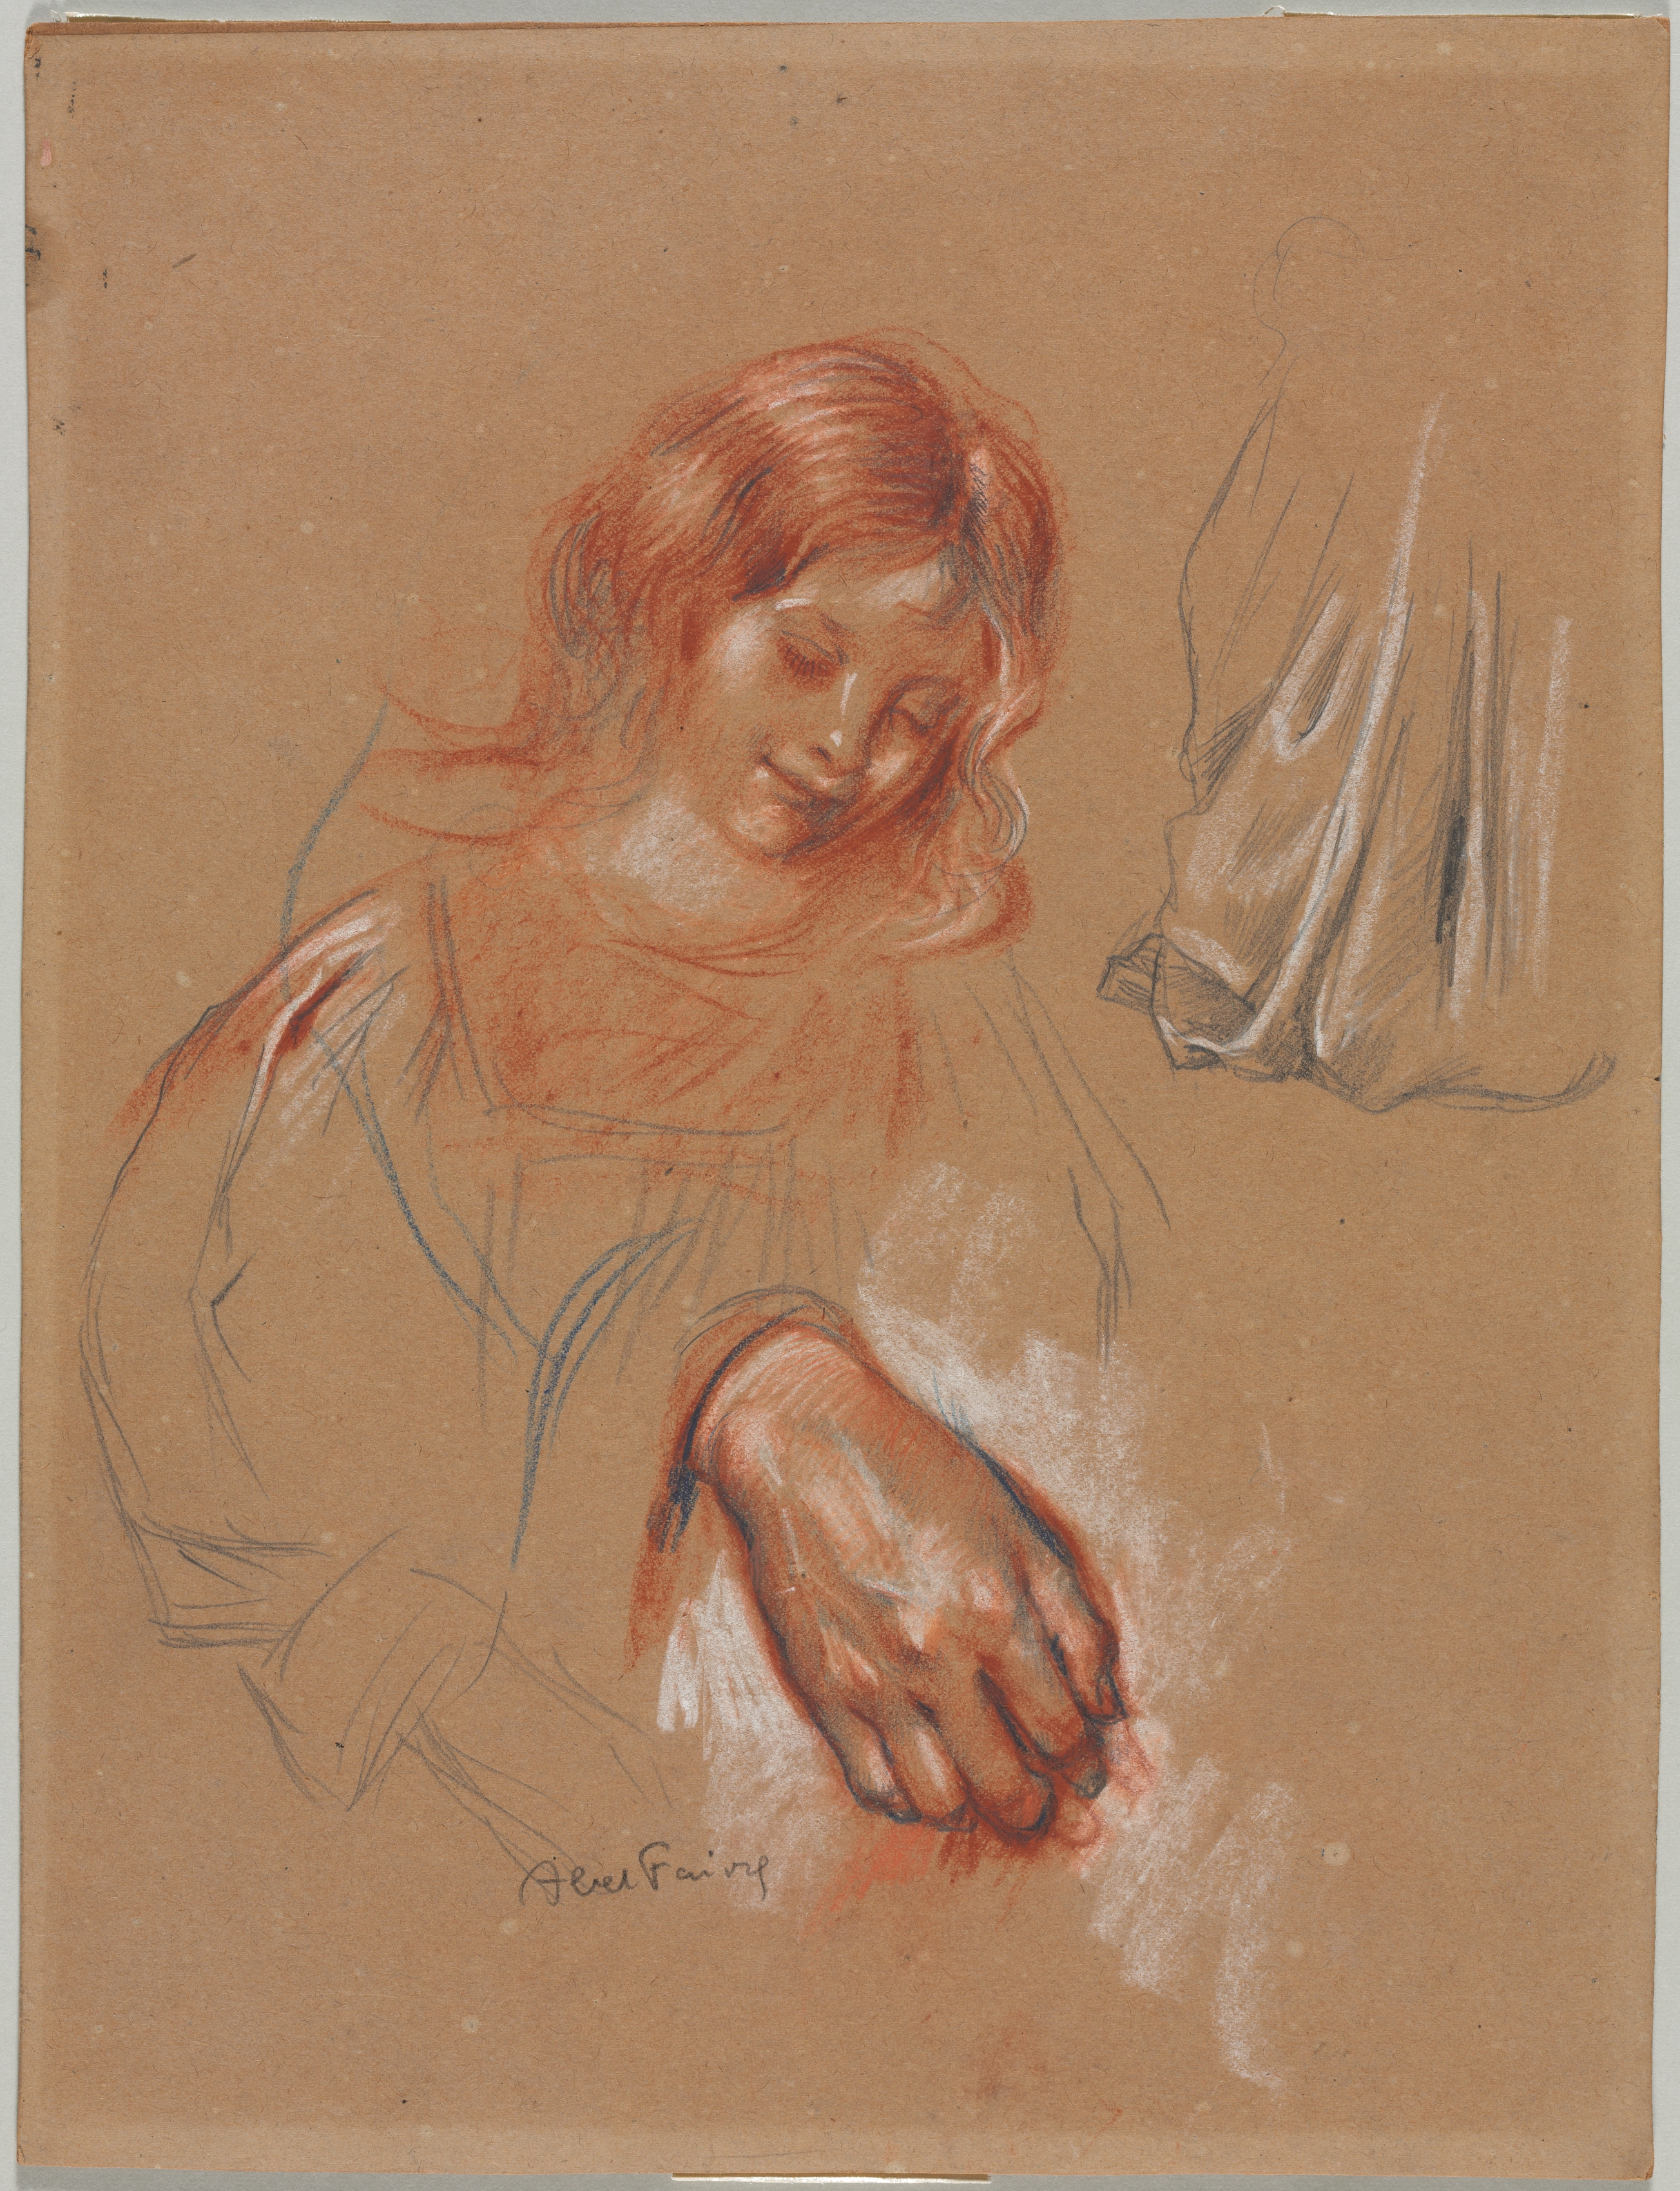 Study of a Child's Head and Study of a Woman's Hand and Drapery